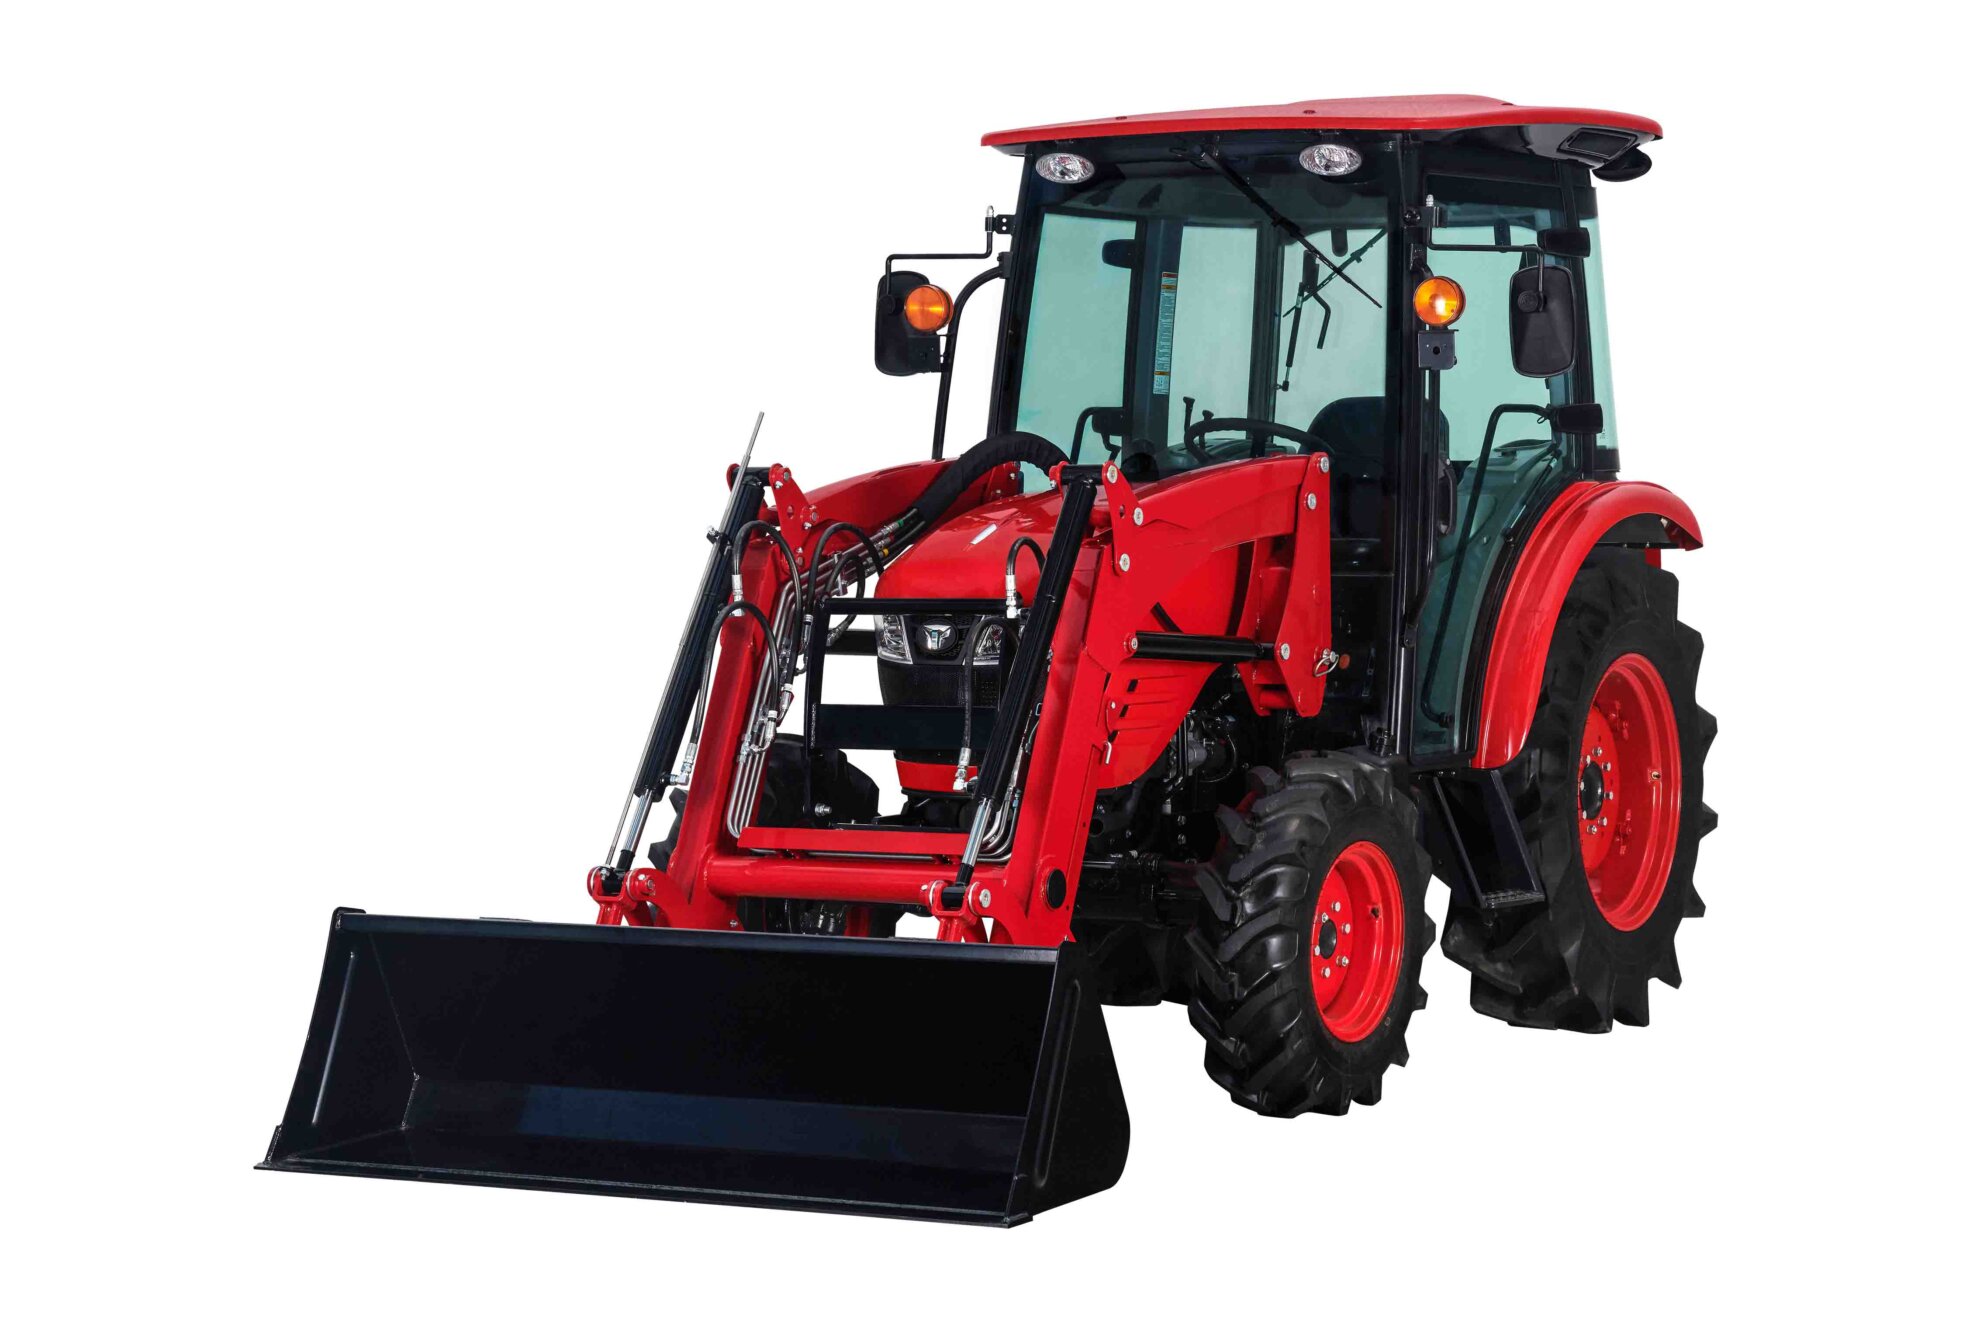 Tym/Branson compact tractor 6225H (Hydr. drive) met cabine